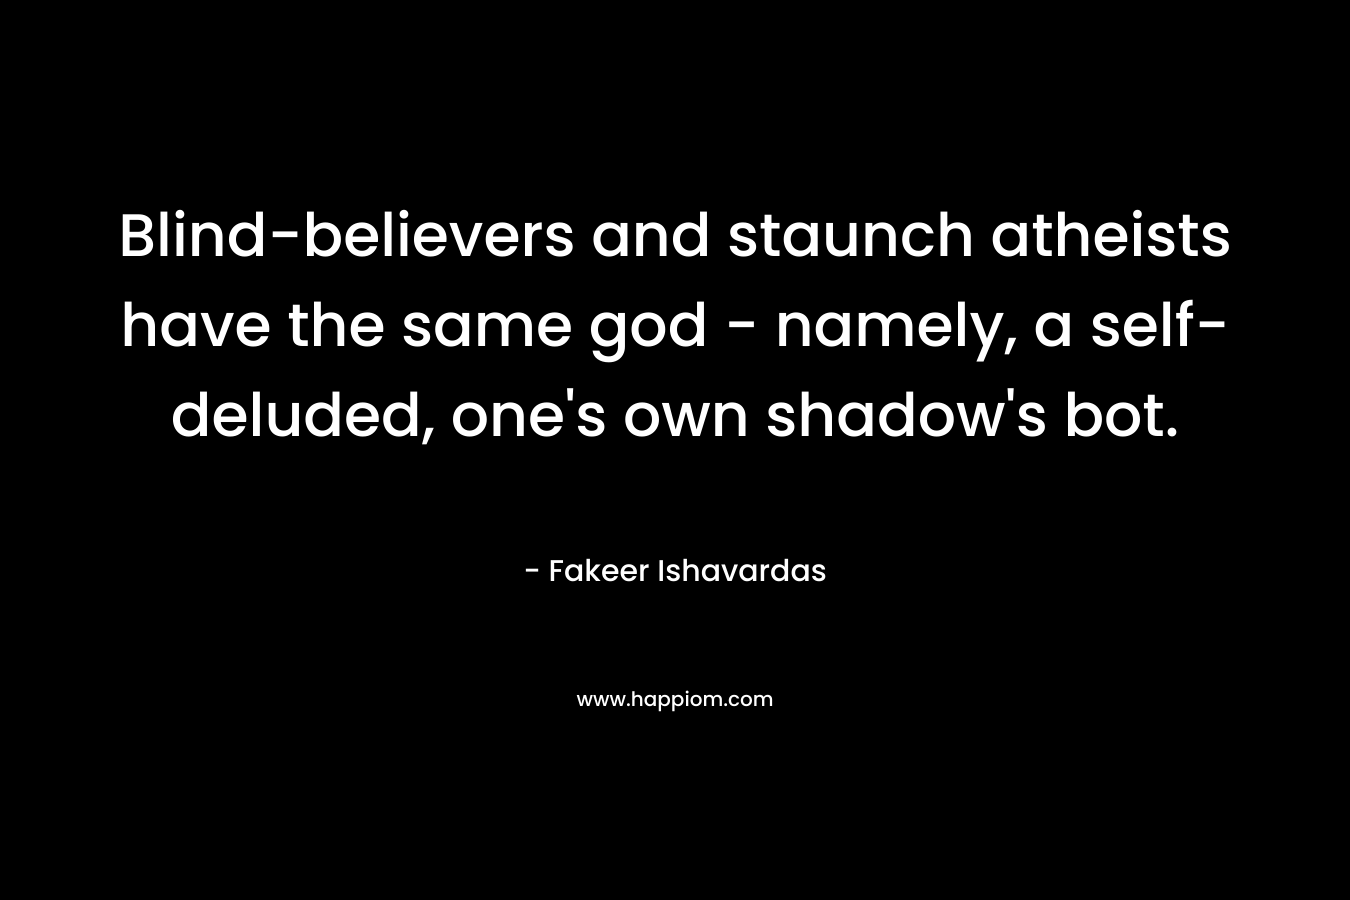 Blind-believers and staunch atheists have the same god - namely, a self-deluded, one's own shadow's bot.